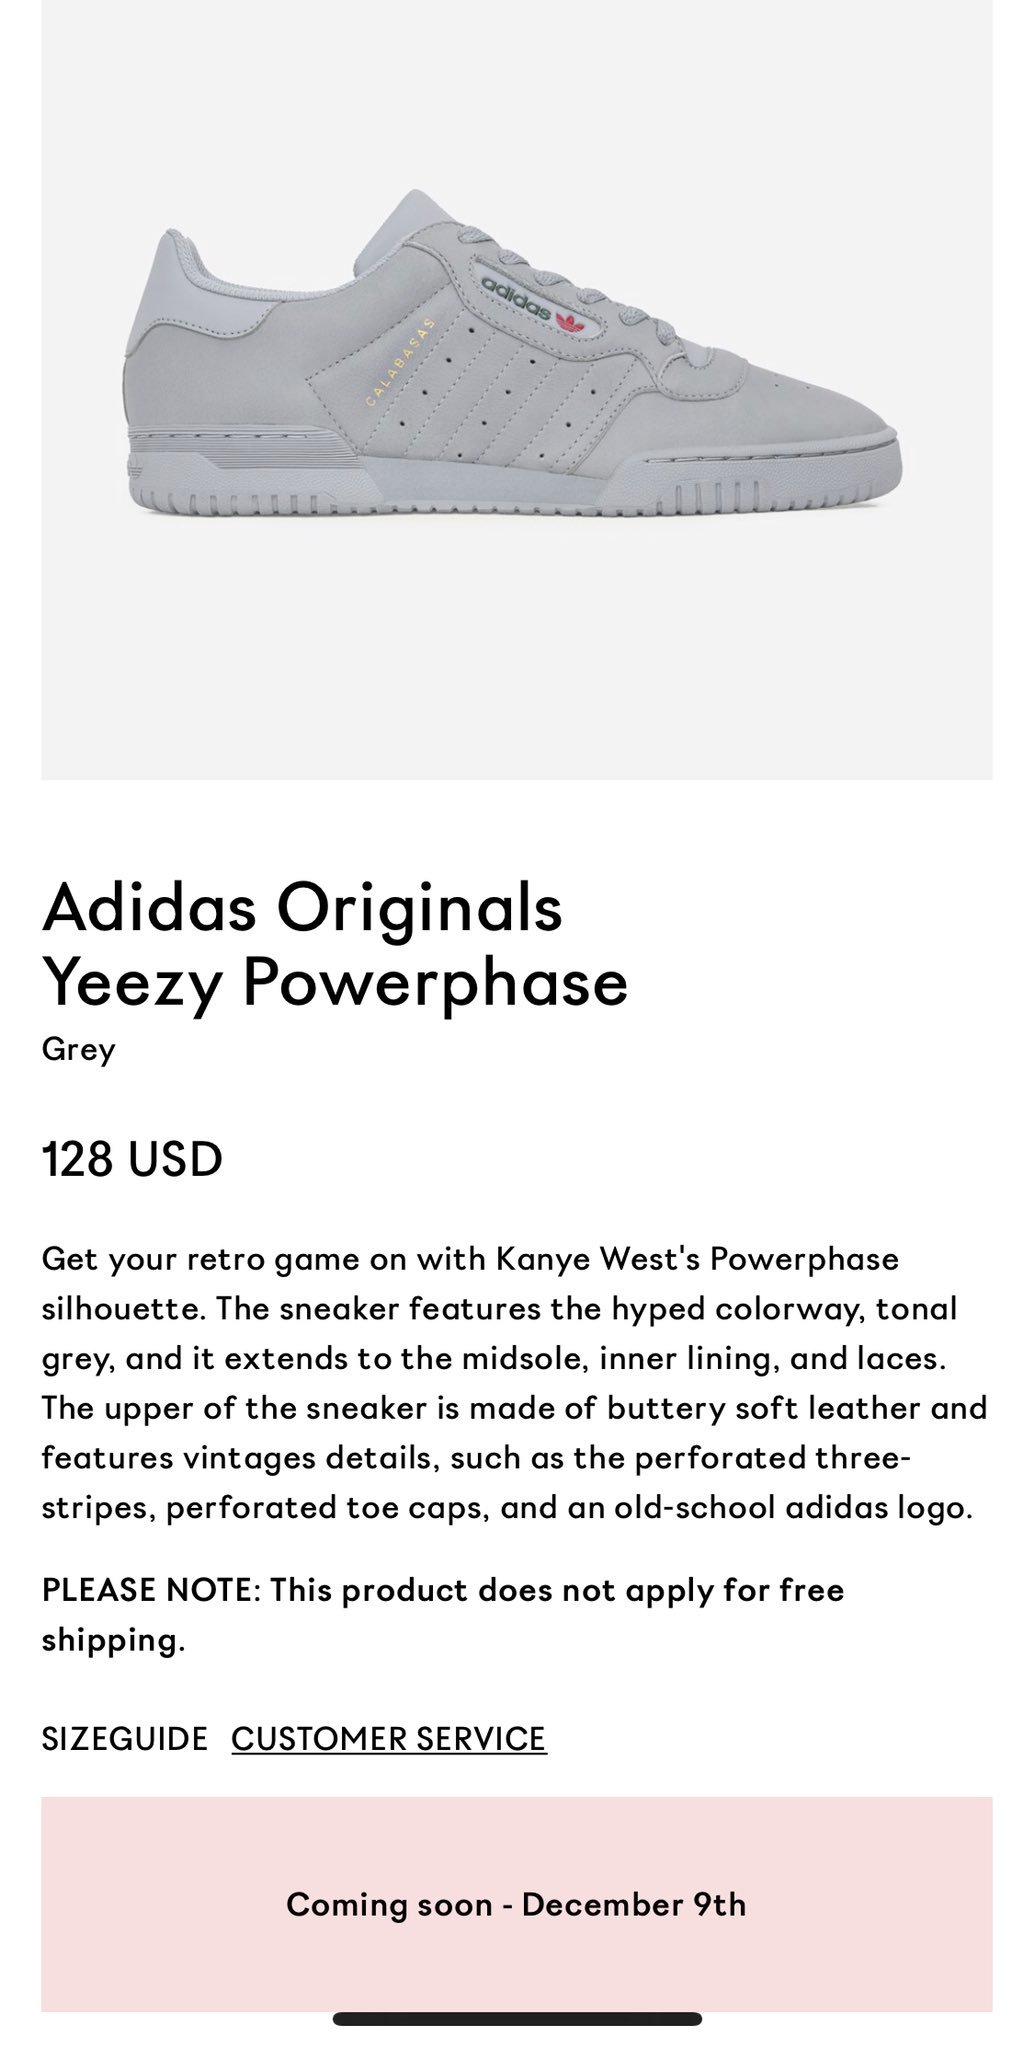 yeezy powerphase size guide